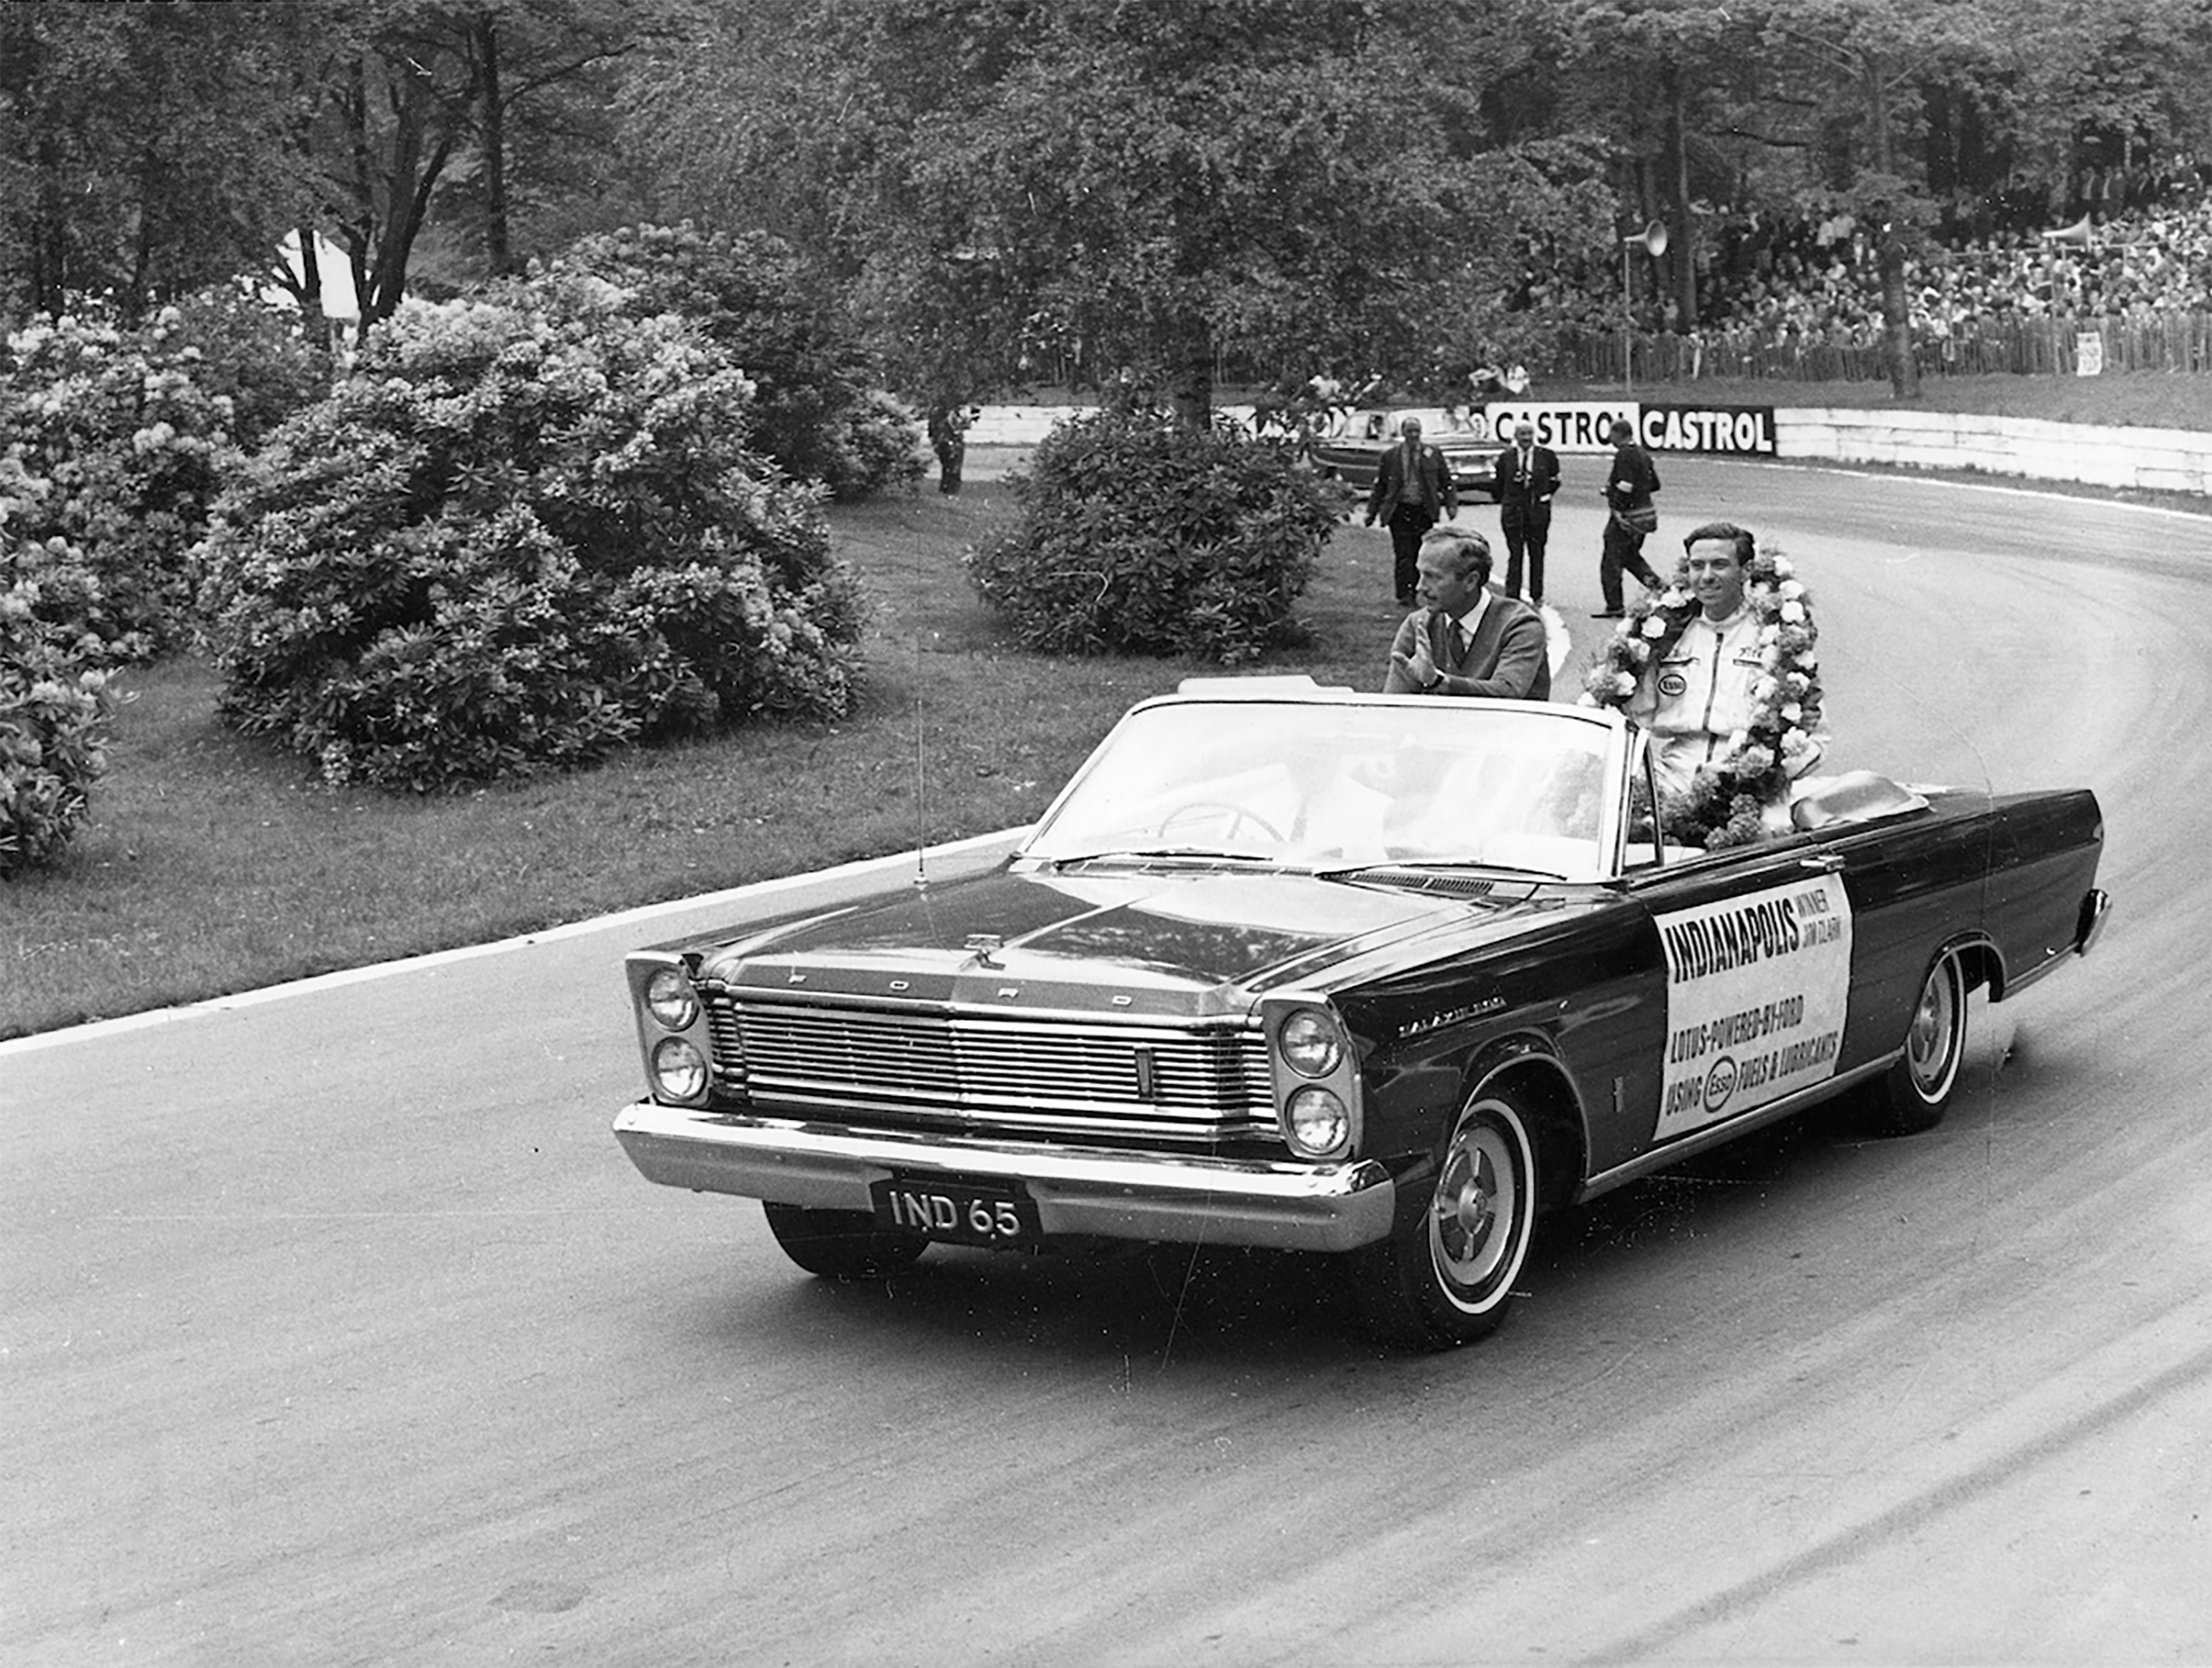 Spoils of victory - Jimmy with Colin Chapman on a tour of honour at the BARC’s Whit-Monday Crystal Palace meeting in their Ford Galaxie 500 convertible after having won the 1965 Indianapolis ‘500’ Miles in the USA. The crowd went barmy...